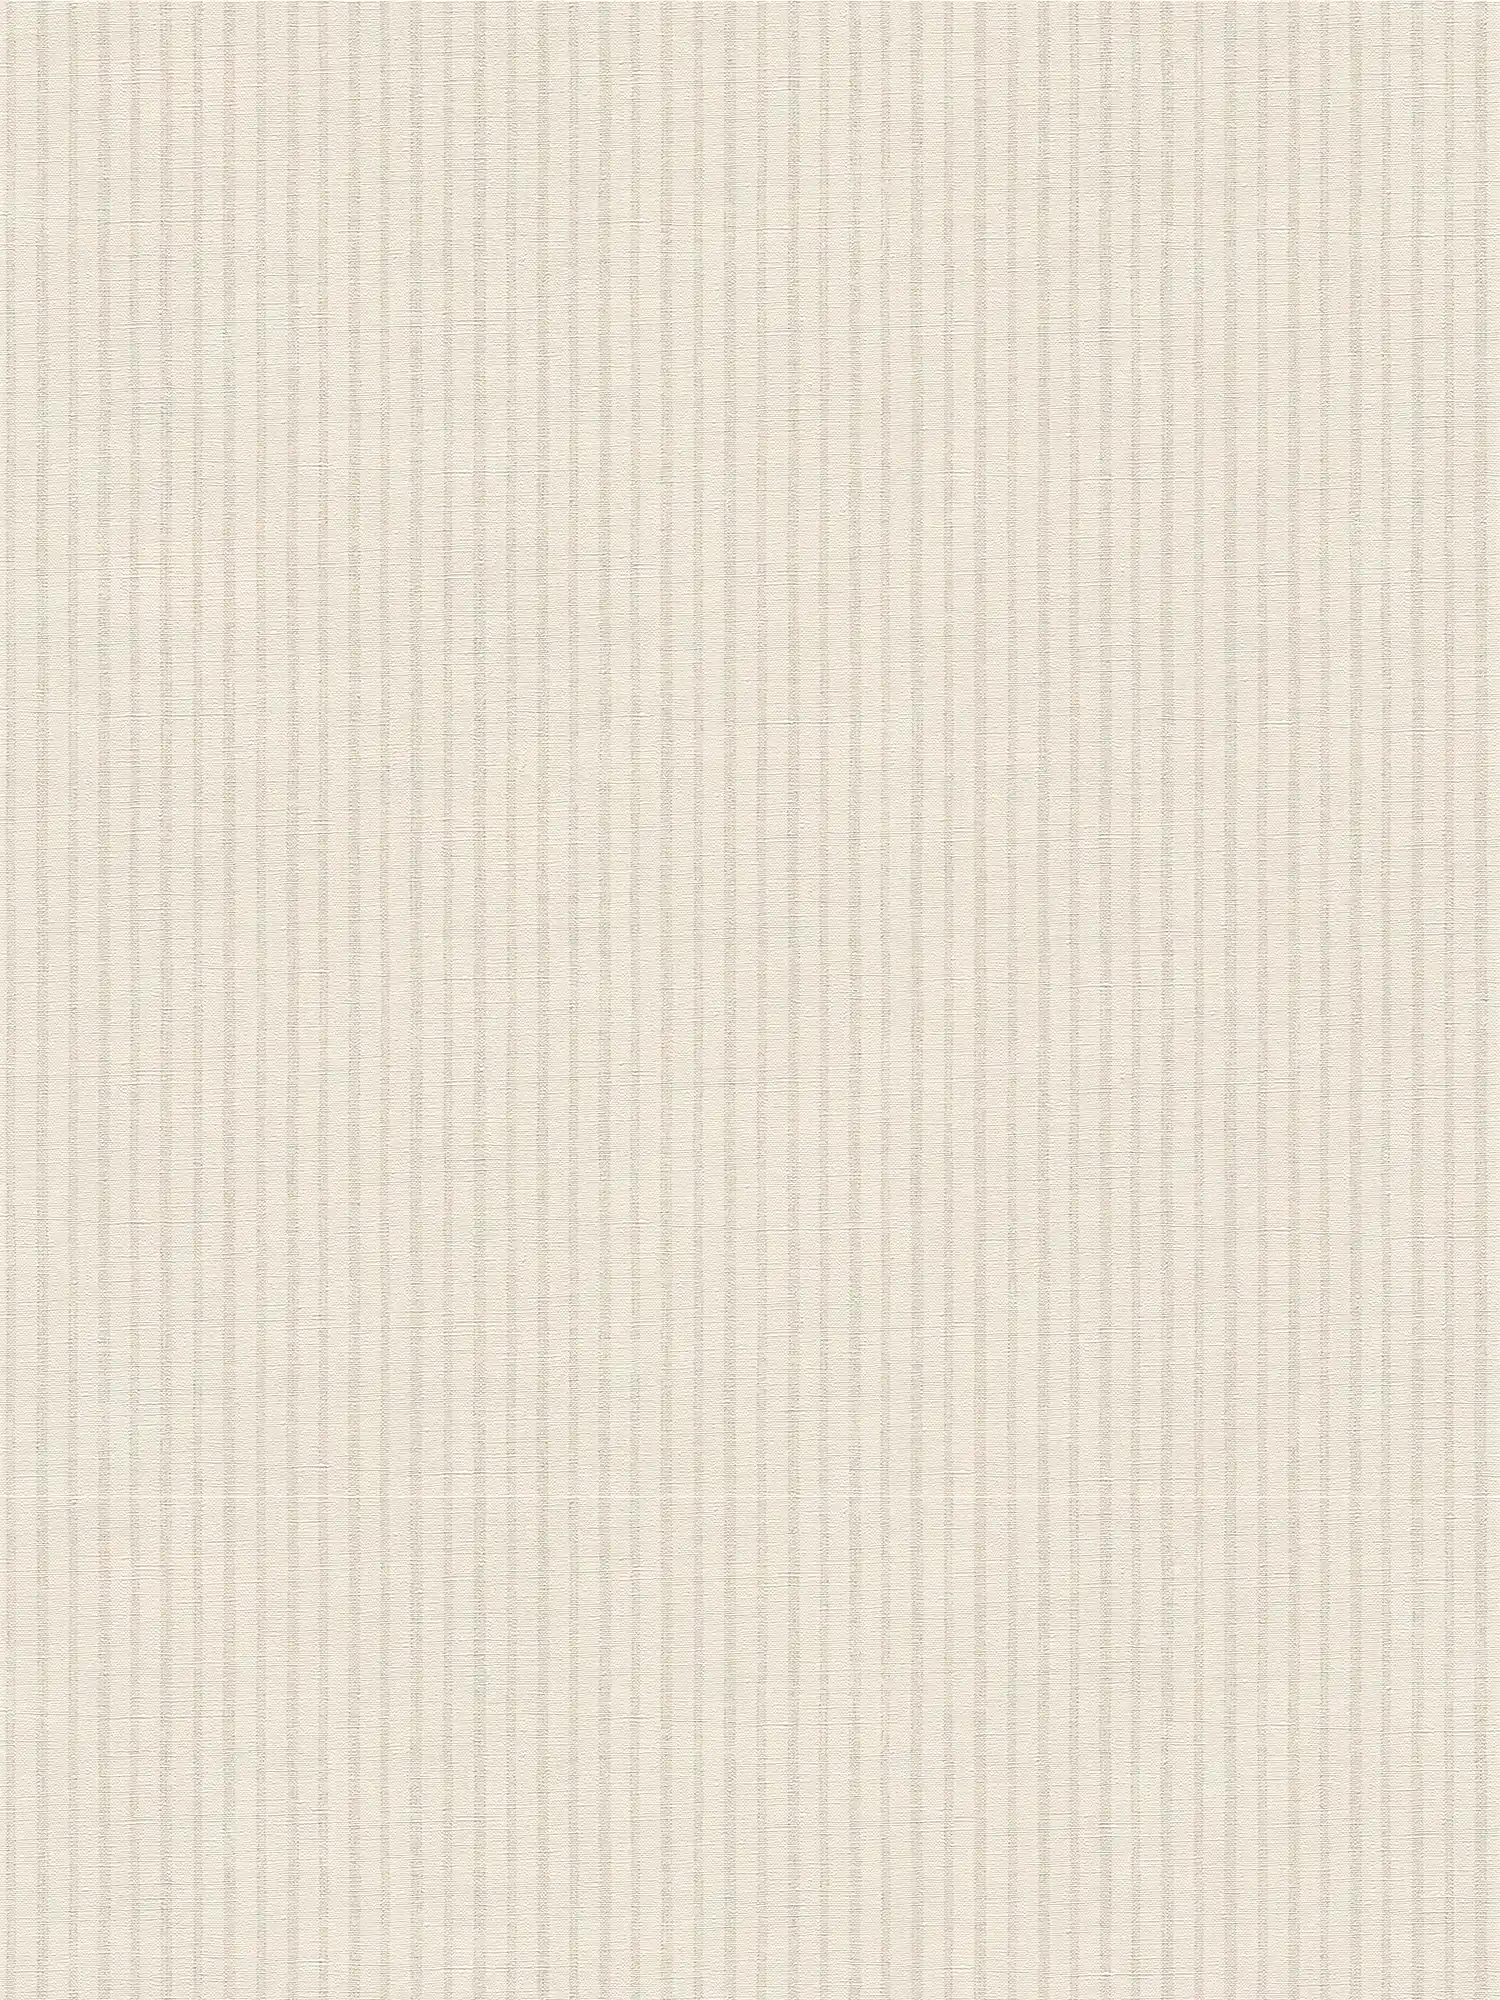         Non-woven wallpaper with subtle stripes in country style - white, grey
    